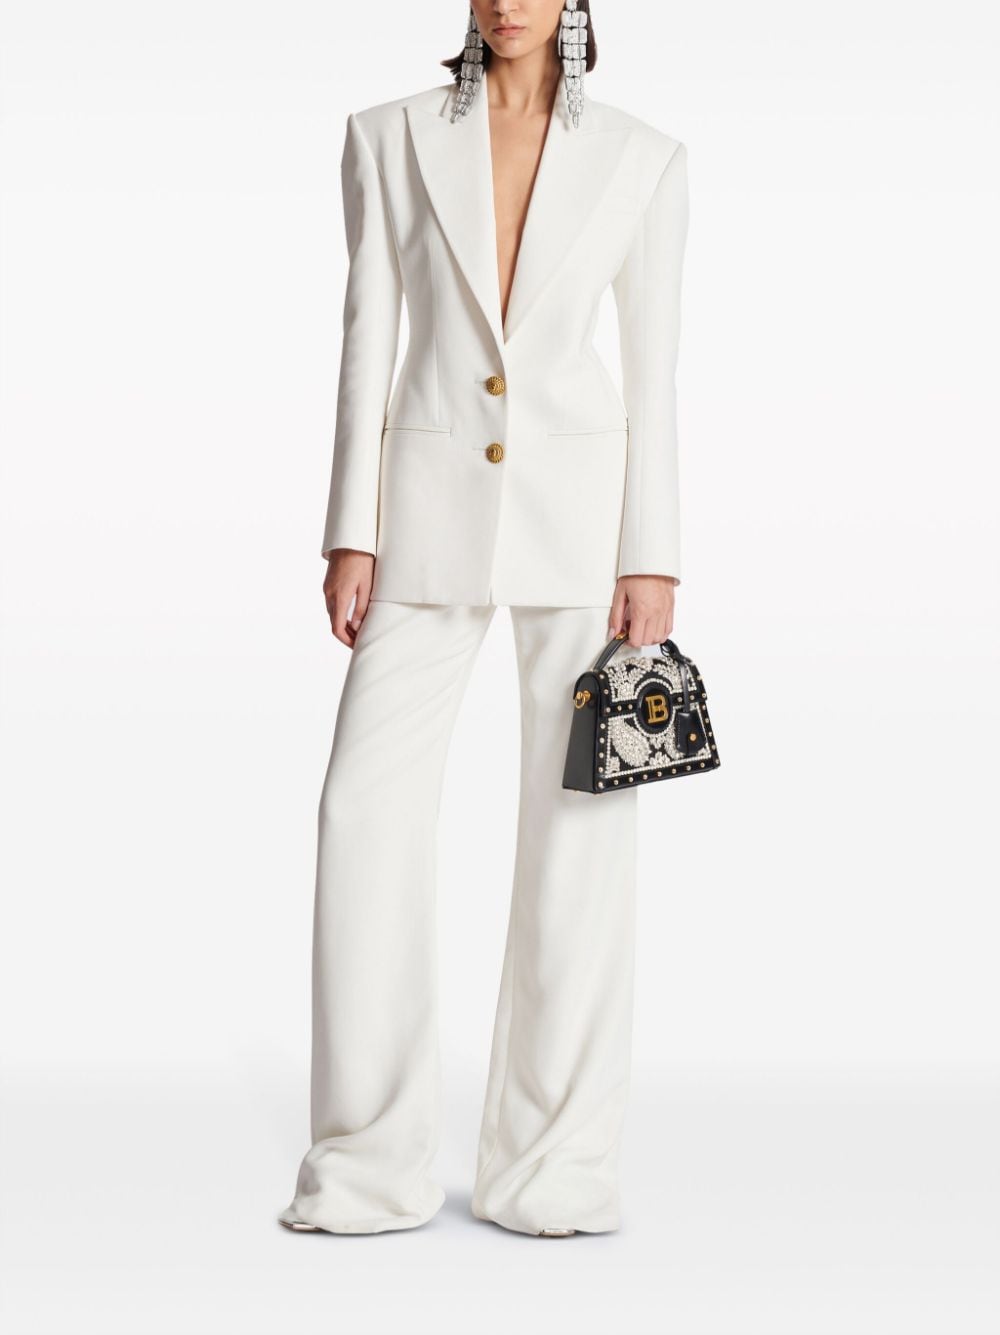 BALMAIN Structured White CreasedêPleated Single-Breasted Jacket for Women